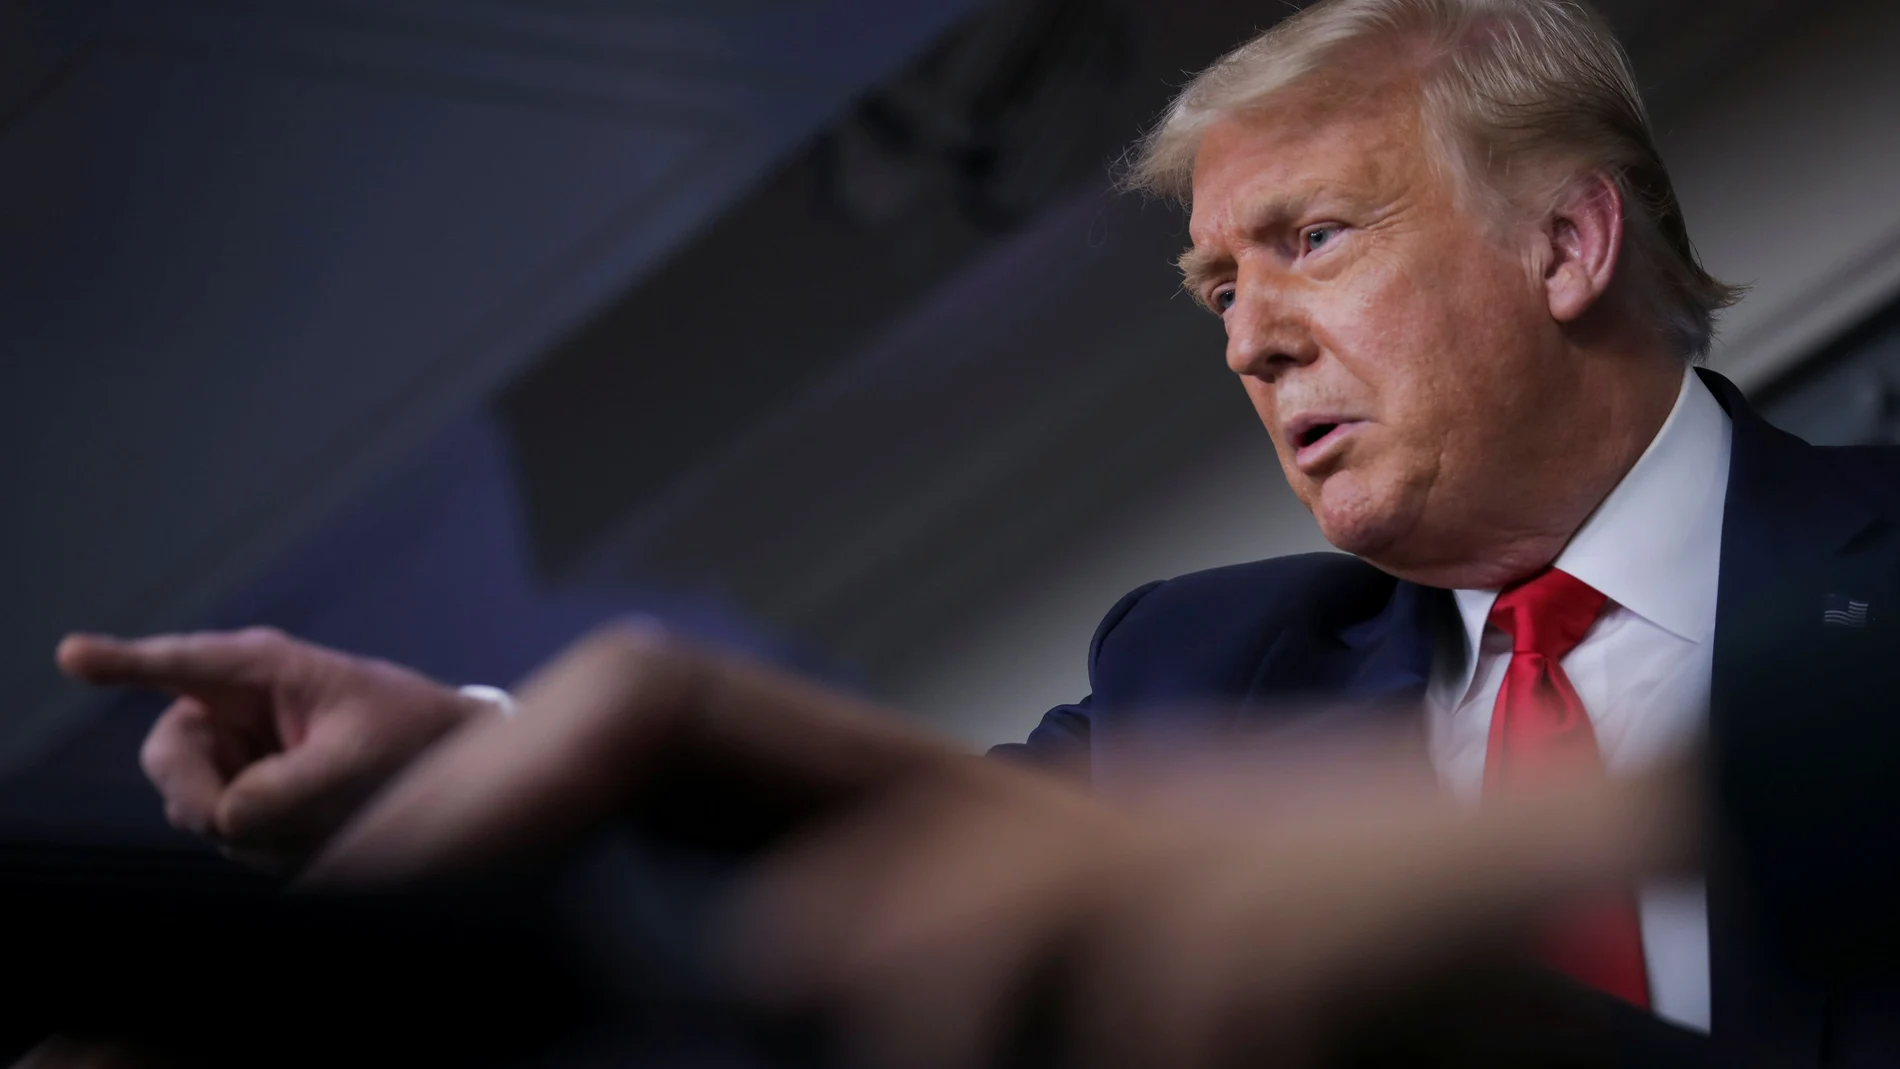 U.S. President Donald Trump points to a reporter as he answers questions during a coronavirus disease (COVID-19) task force news briefing at the White House in Washington, U.S., July 28, 2020. REUTERS/Carlos Barria